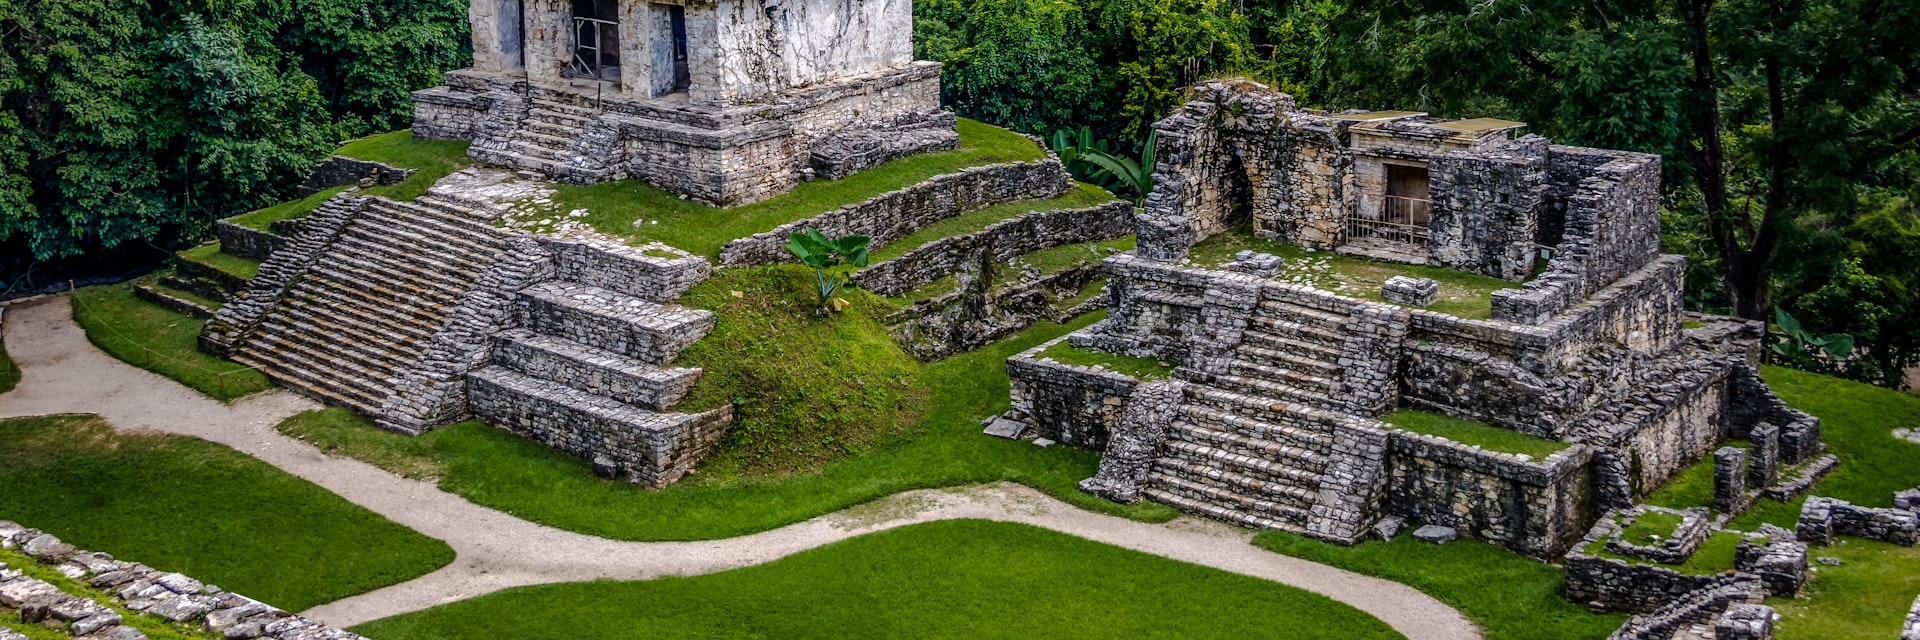 Temples of the Cross Group at the Mayan ruins of Palenque.